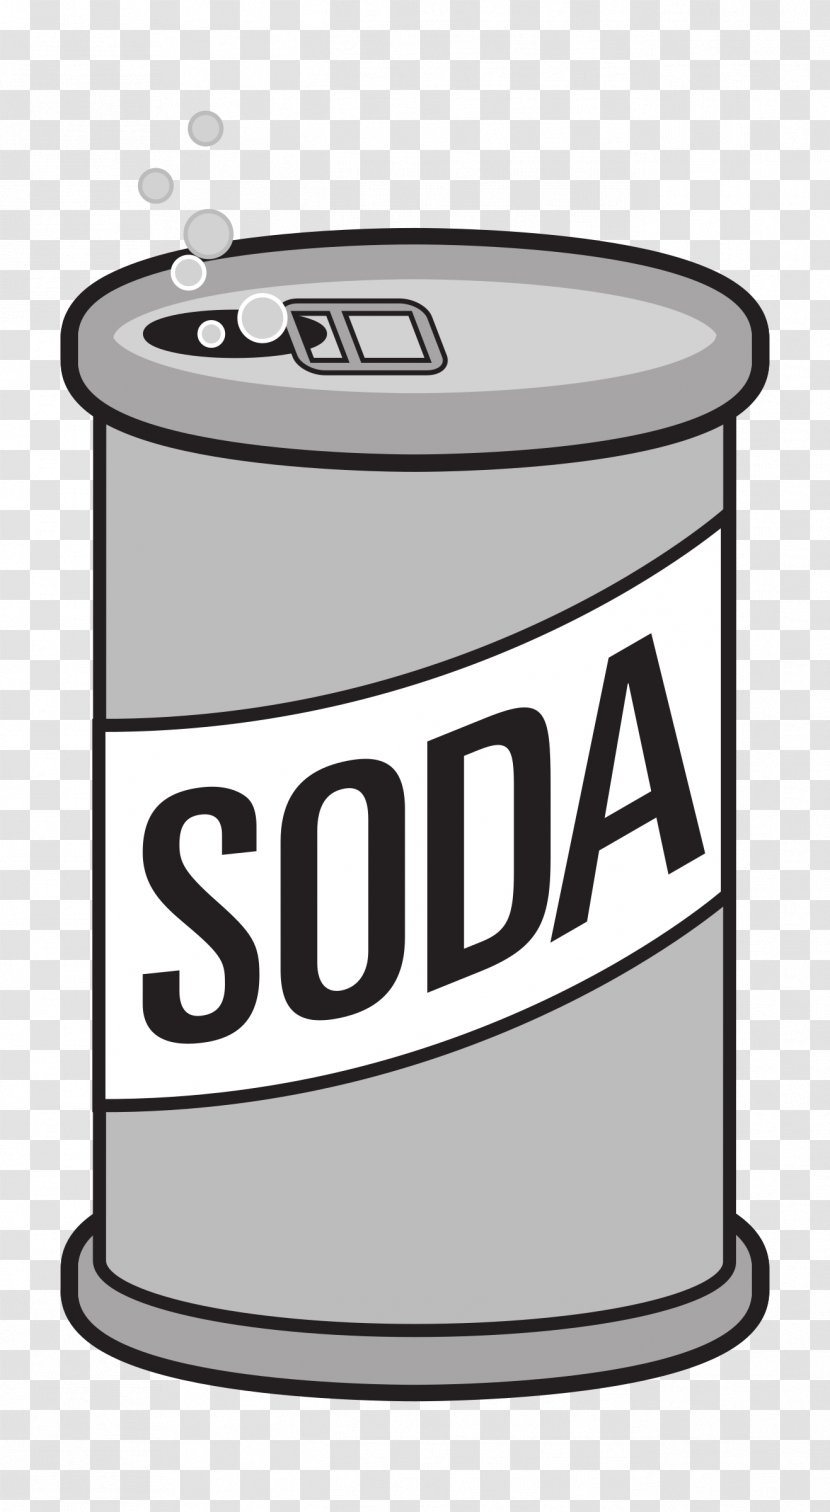 Fizzy Drinks Coca-Cola Beverage Can Clip Art - Drinking Straw - Cans Transparent PNG